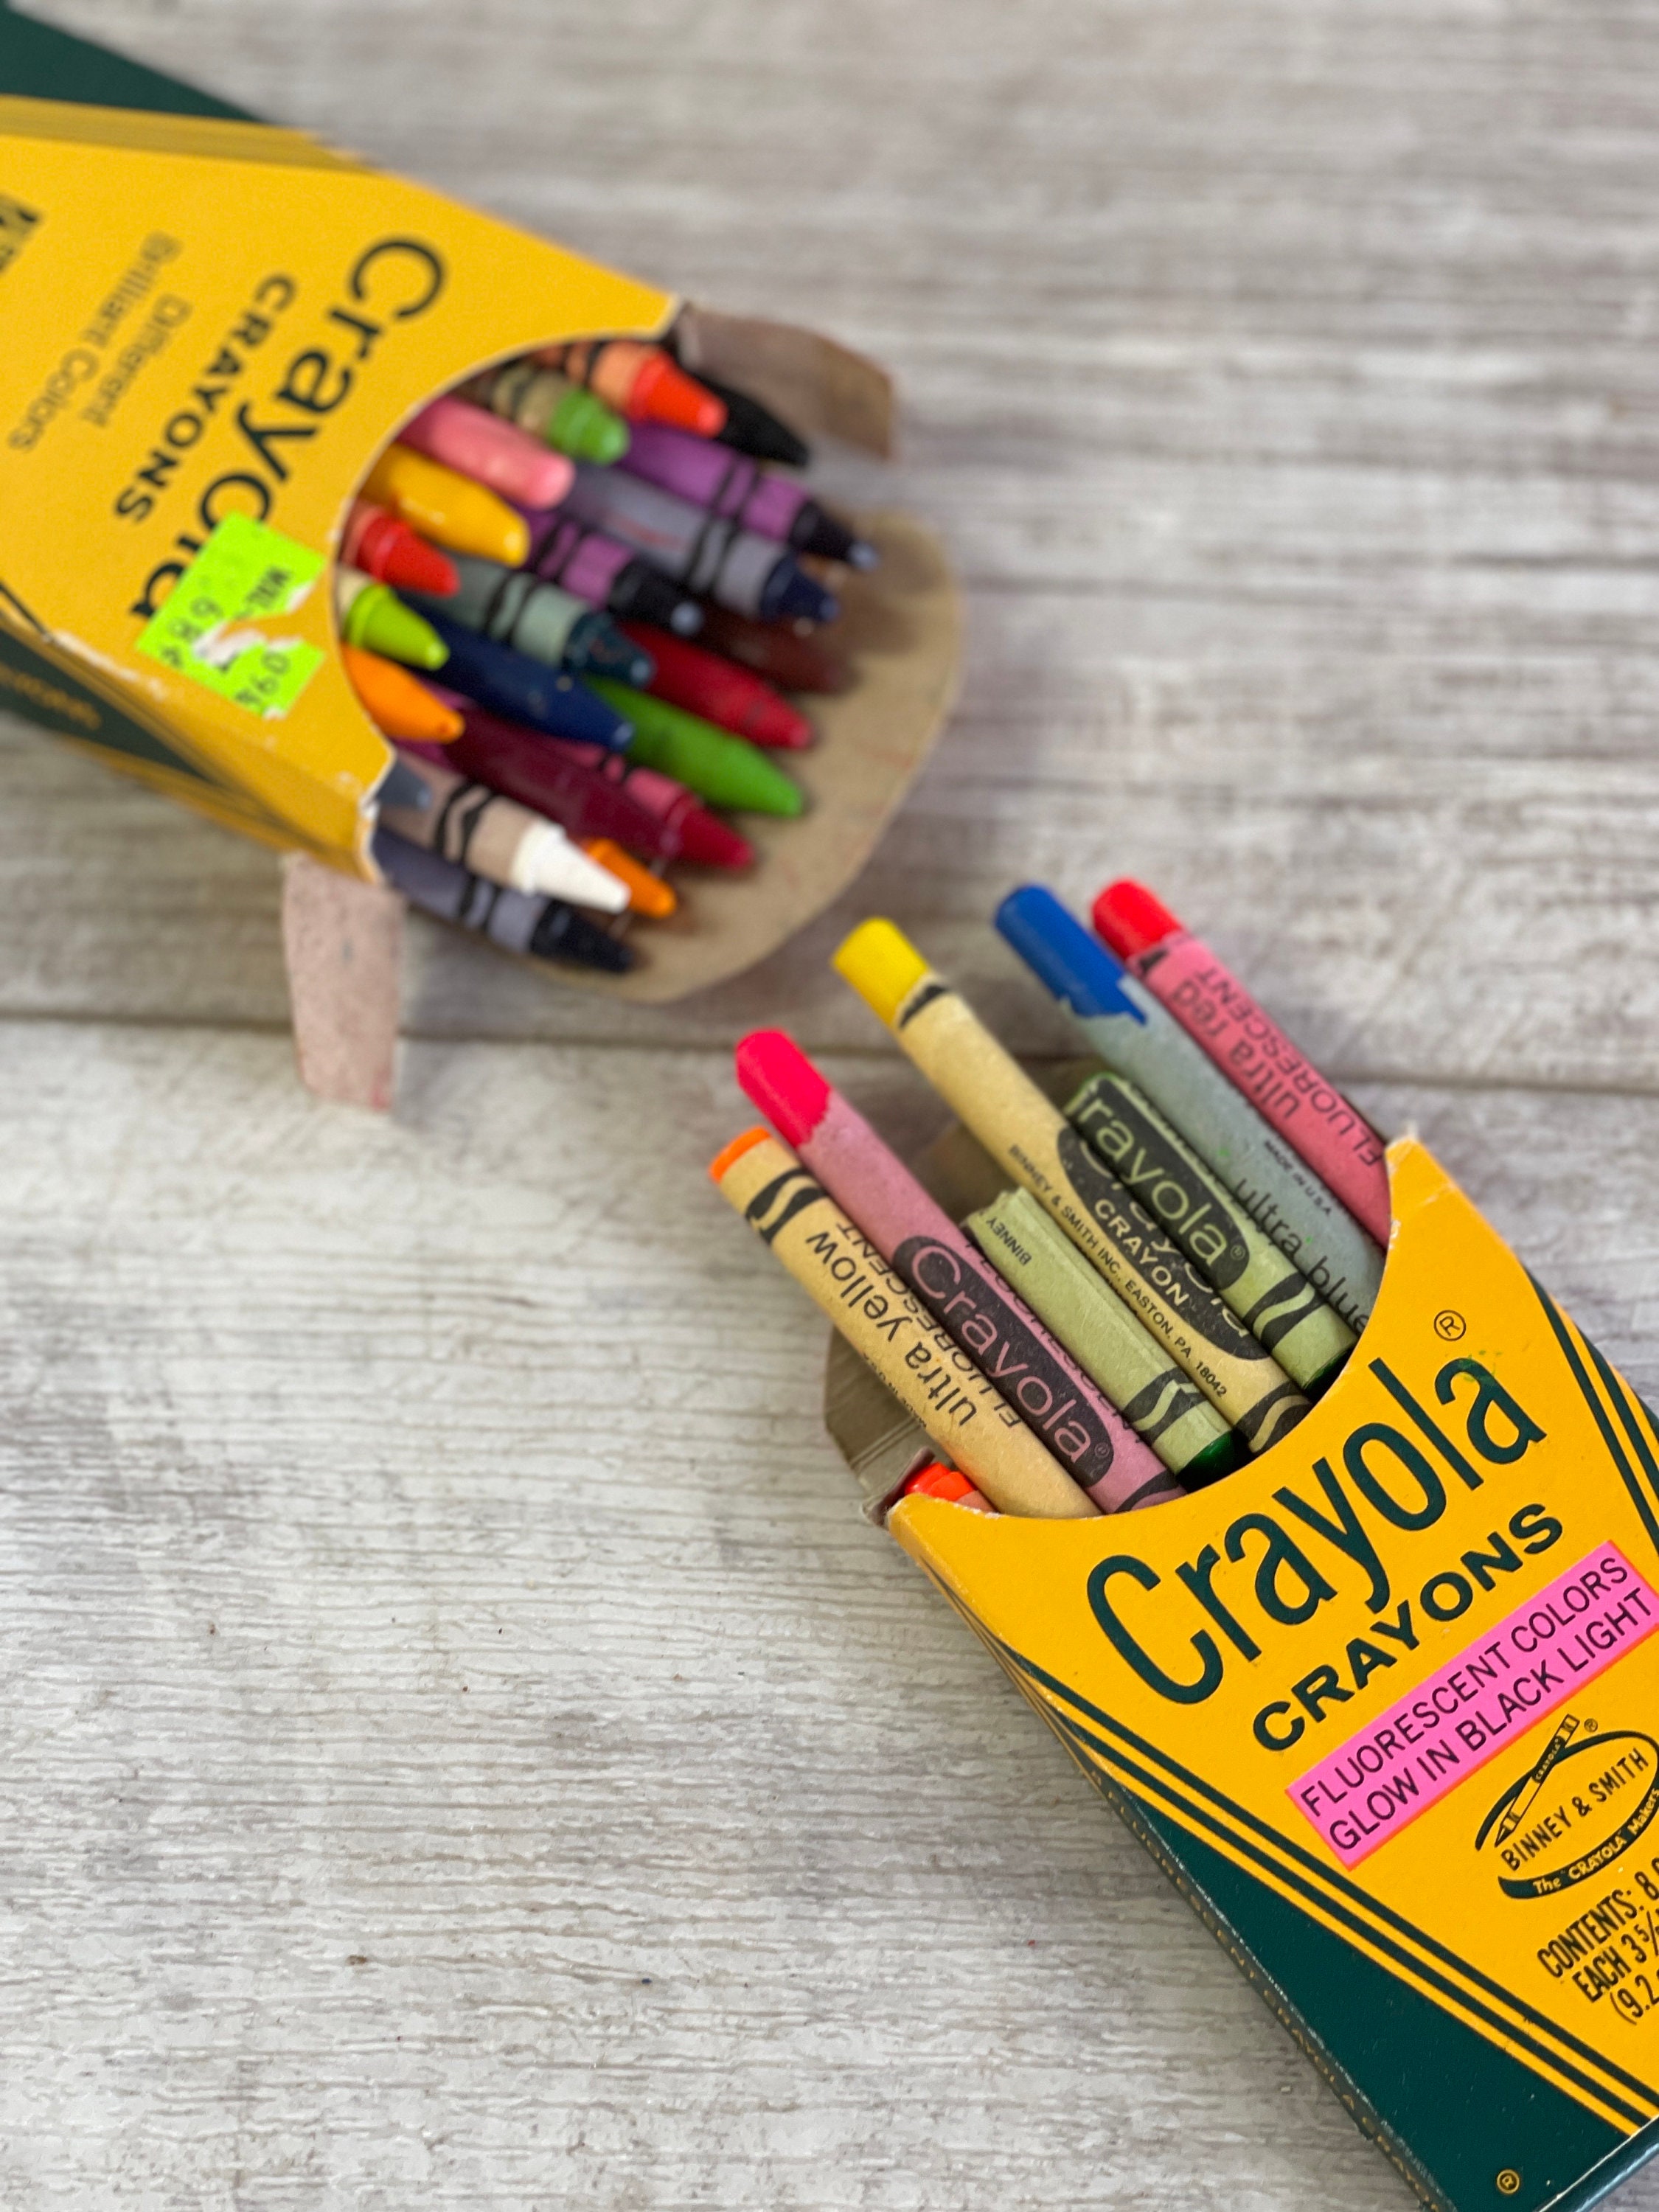 Crayola Crayons / Crayola Markers / Crayola Crayons by Binney and Smith /  Soft & Light Colors / 24 Count / 16 Count / 8 Count / Colors / CIJ 